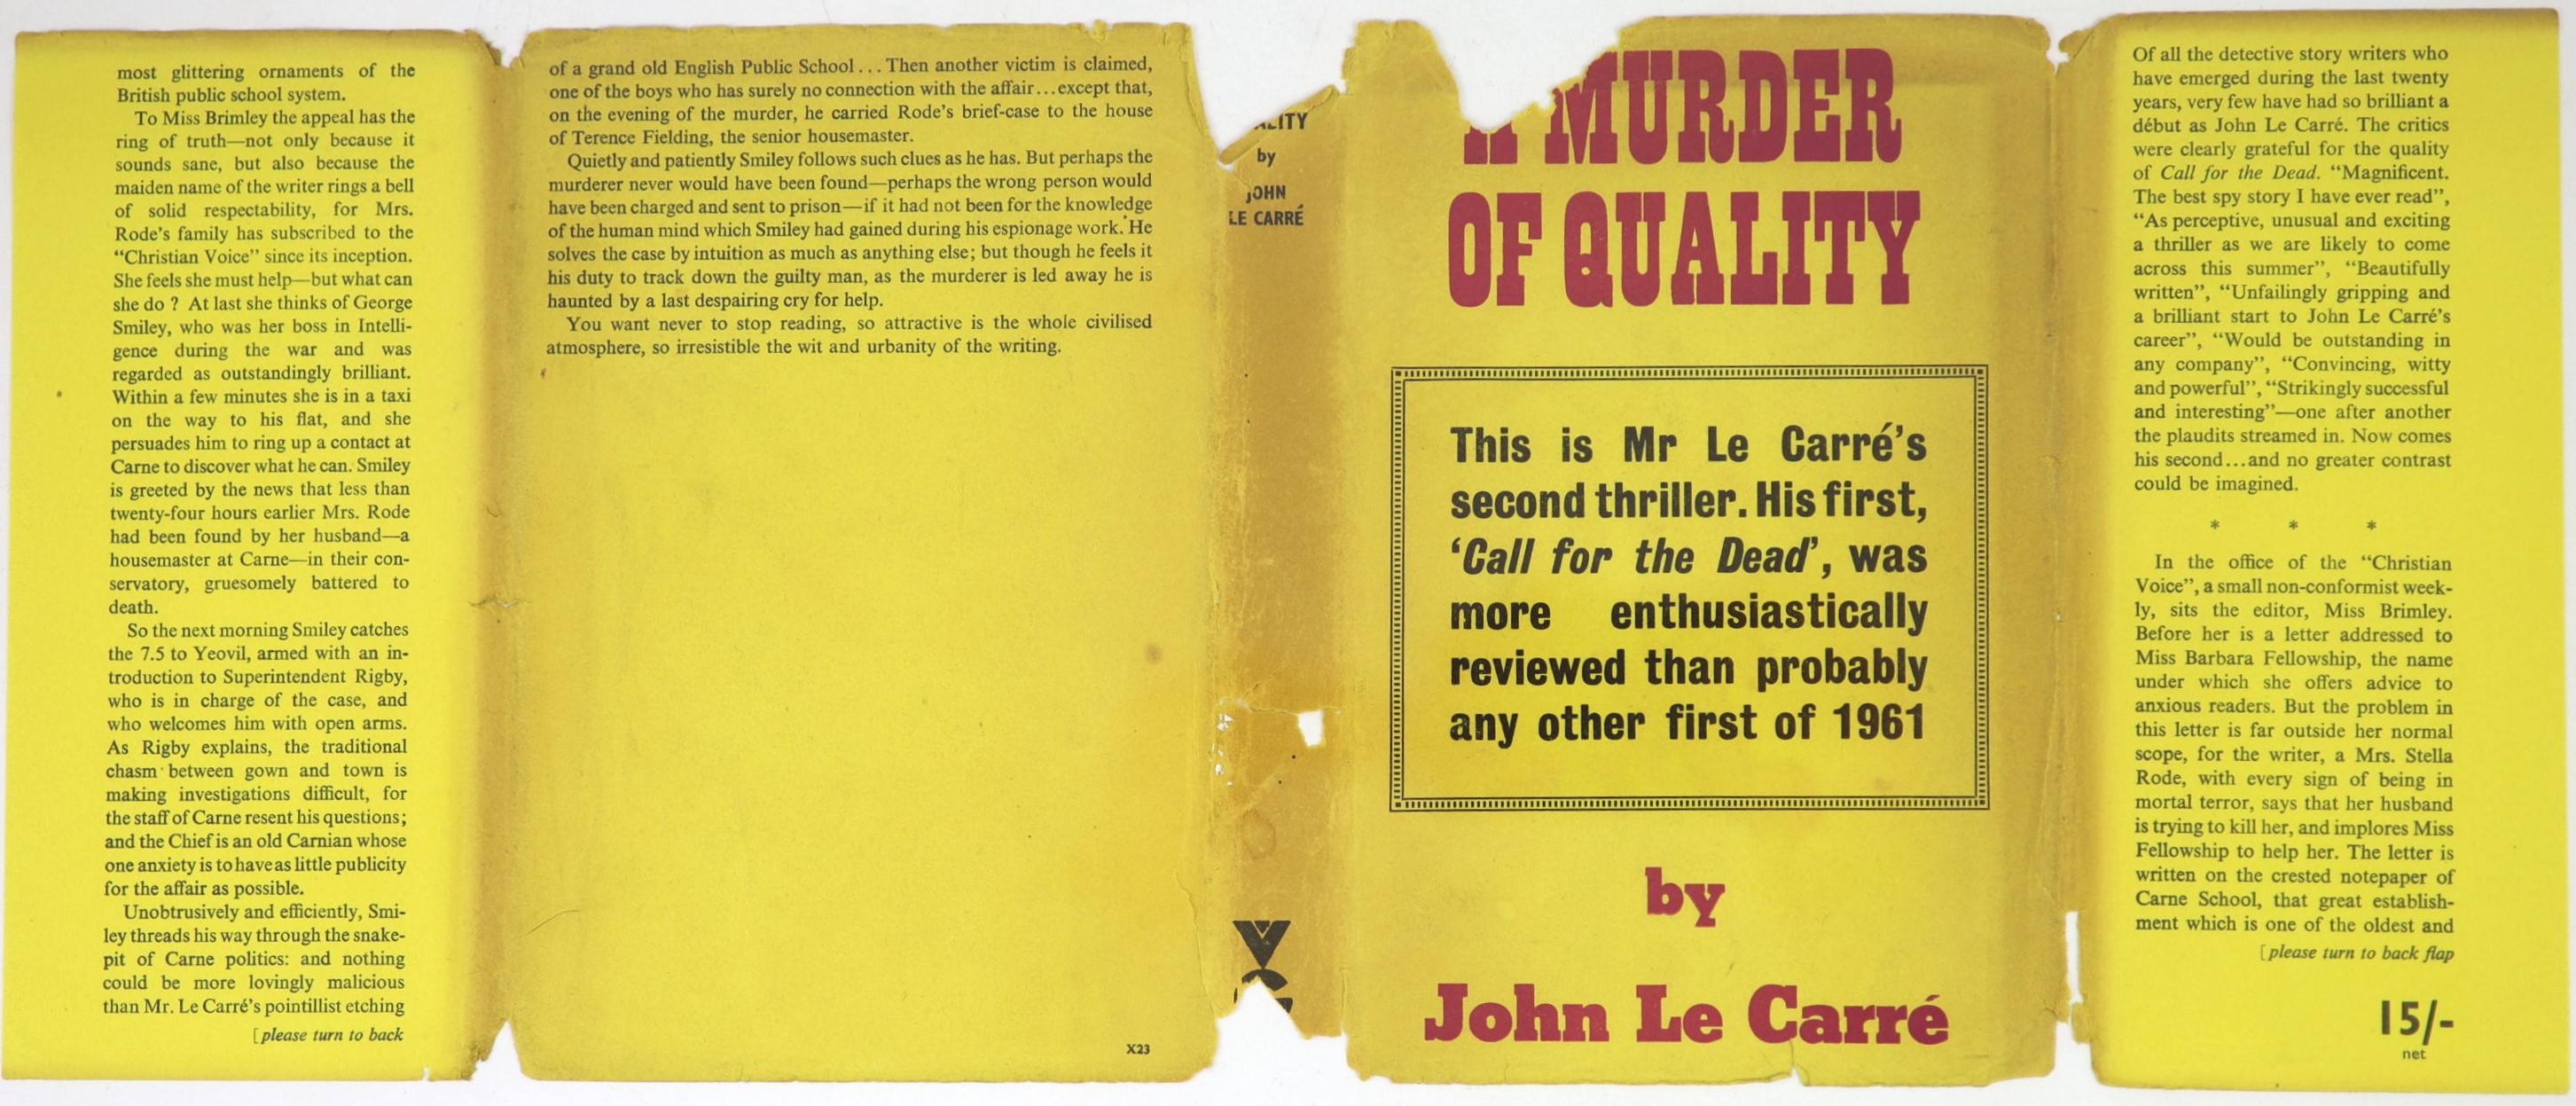 Carre - A Murder of Quality, 1st edition